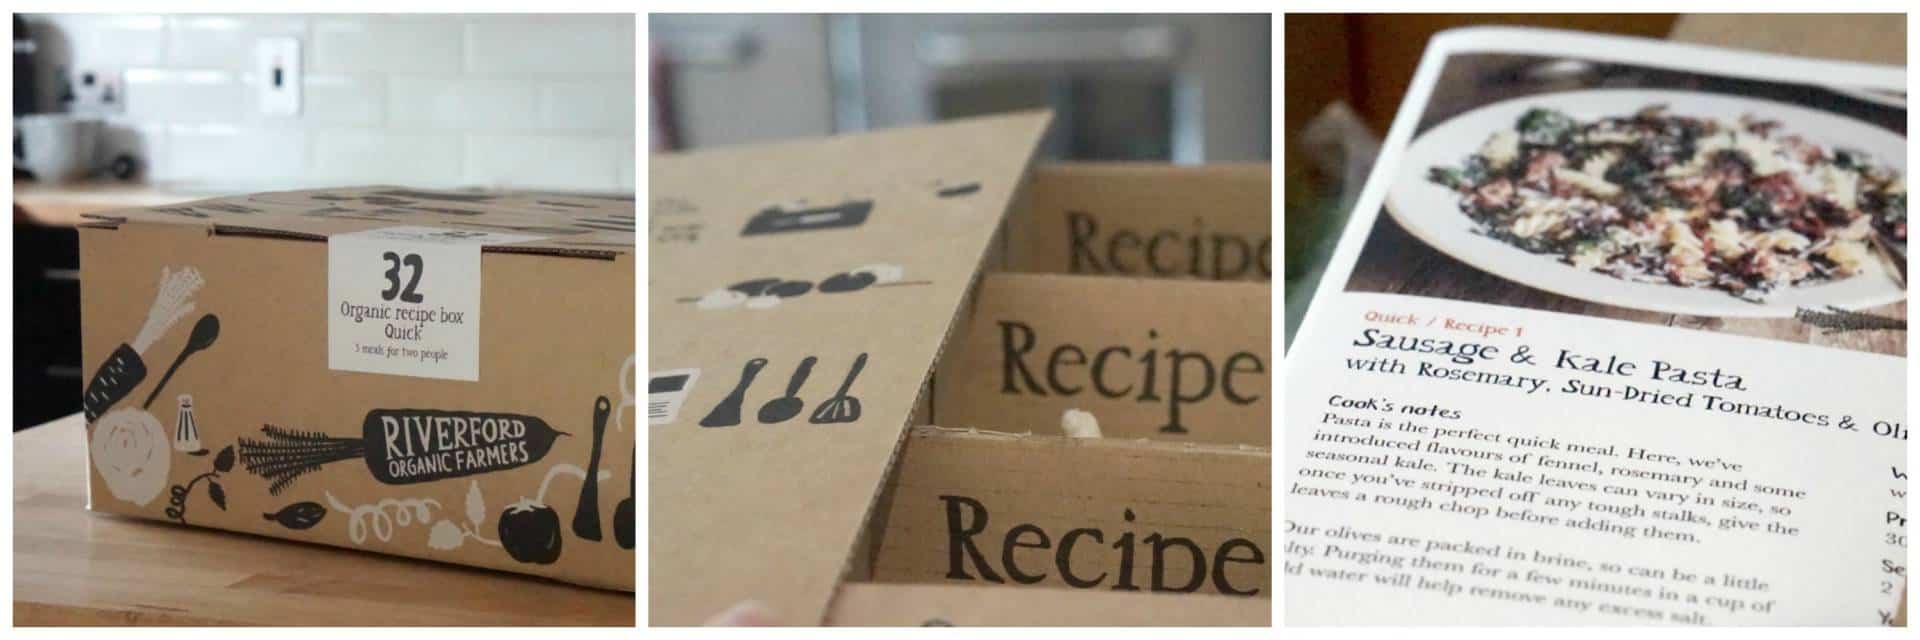 Recipes in a box from Riverford